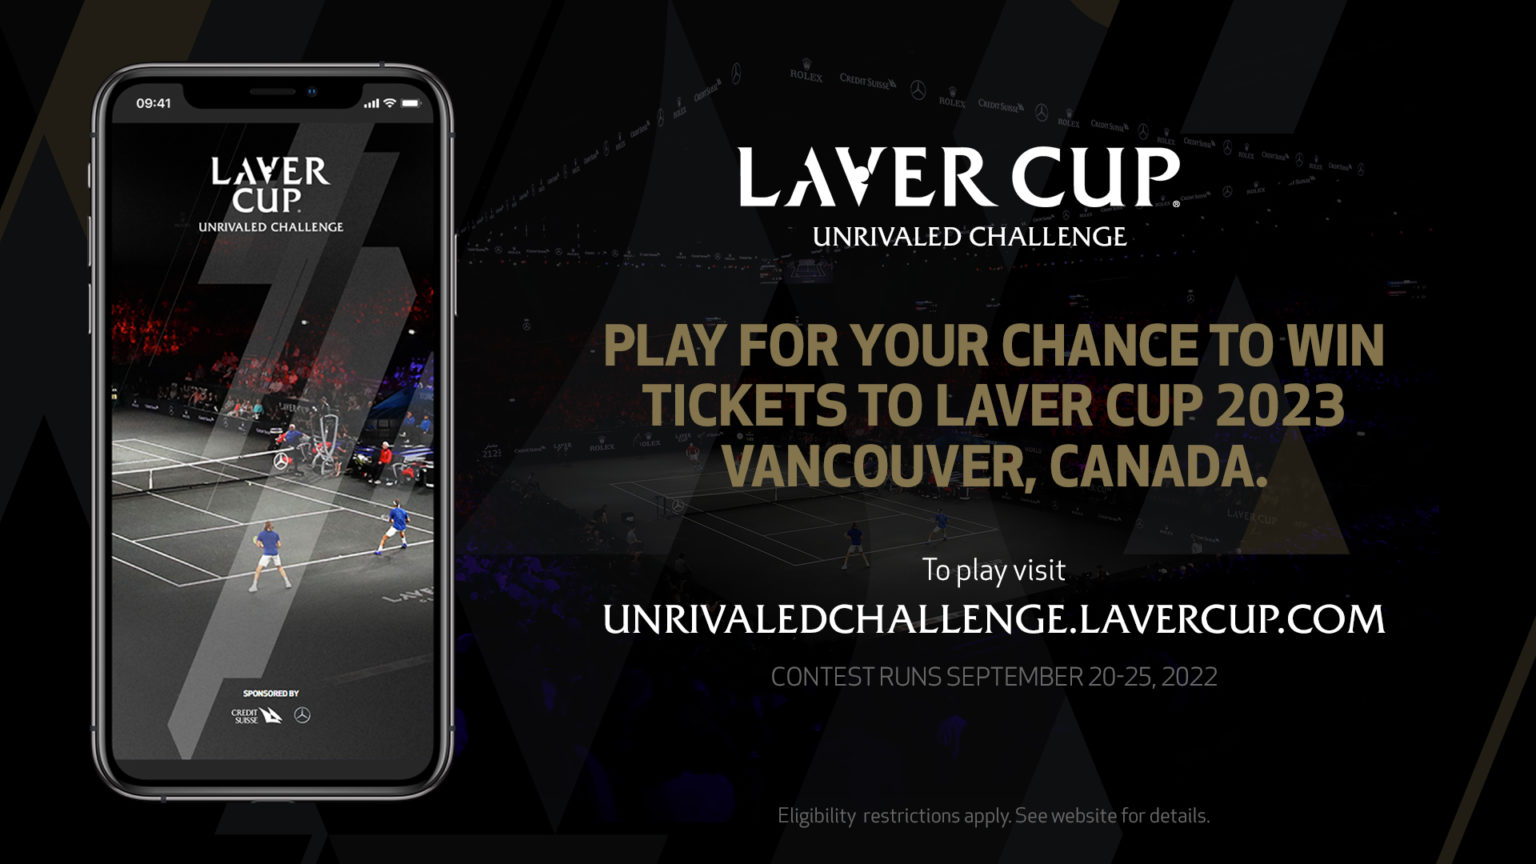 Laver Cup Unrivaled Challenge gives fans a shot at winning Vancouver